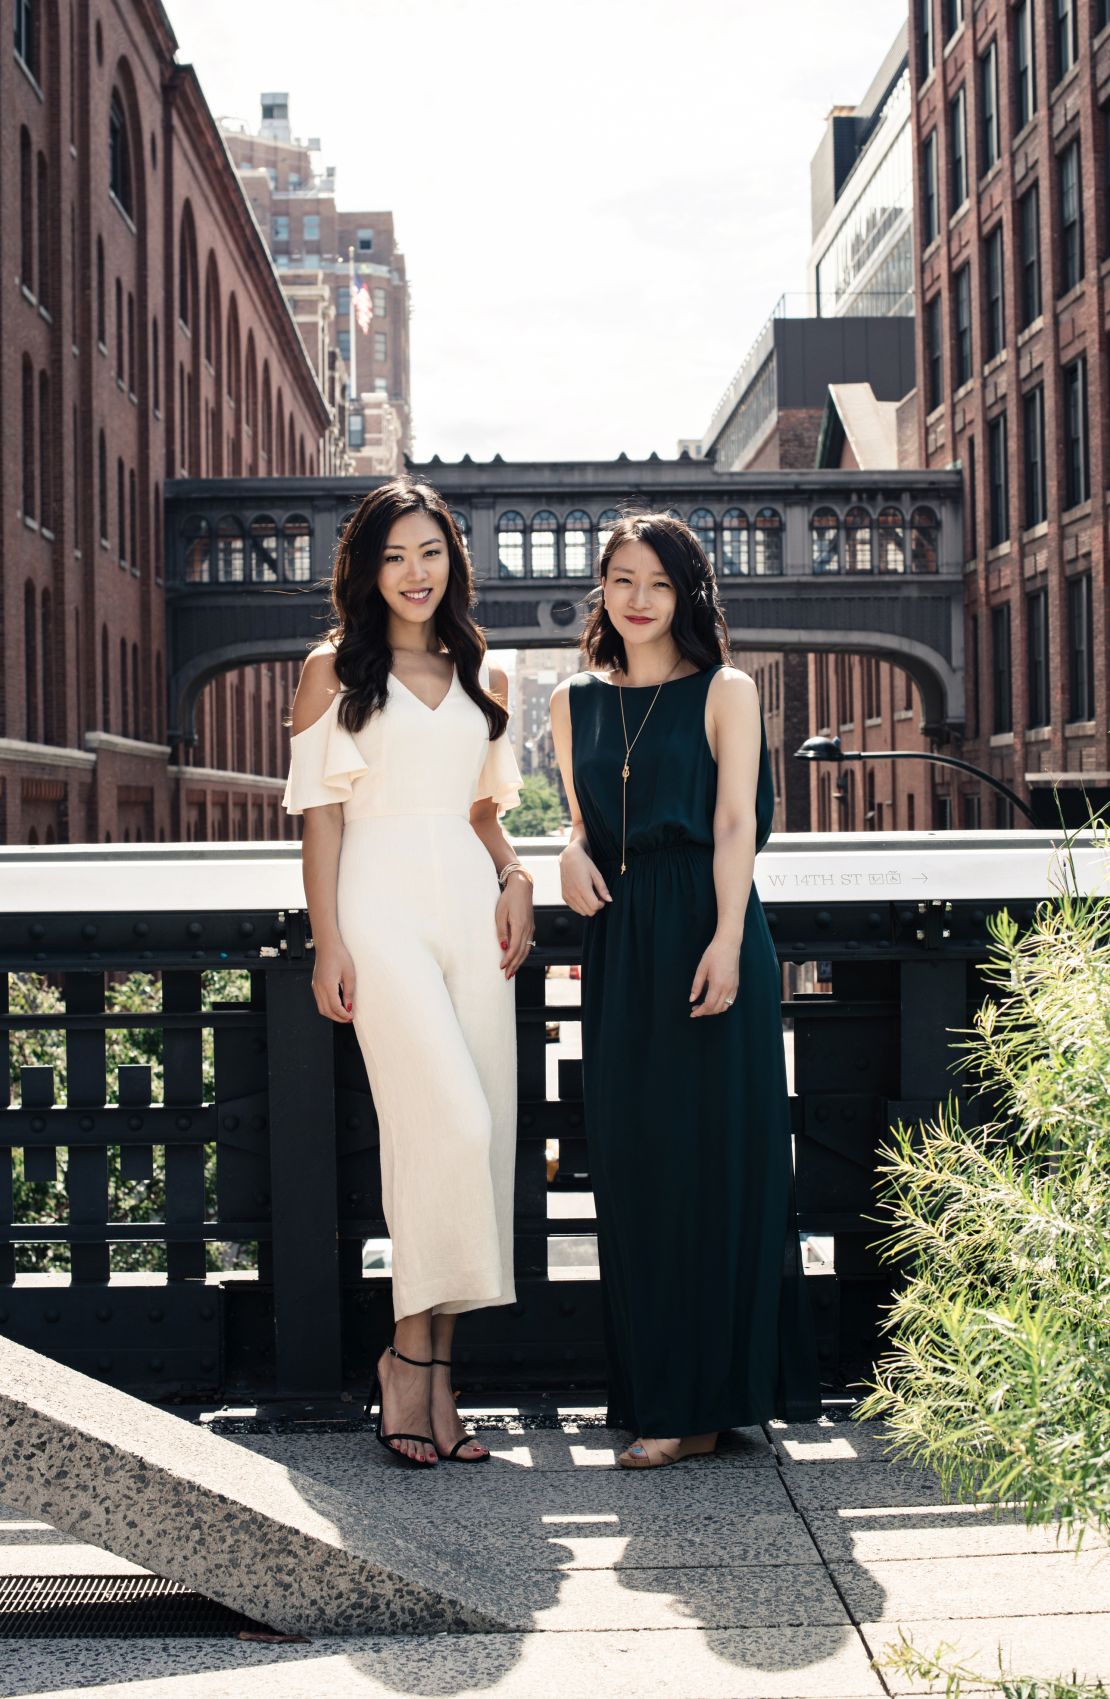 Glow Recipe co-founders Sarah Lee, left, and Christine Chang.